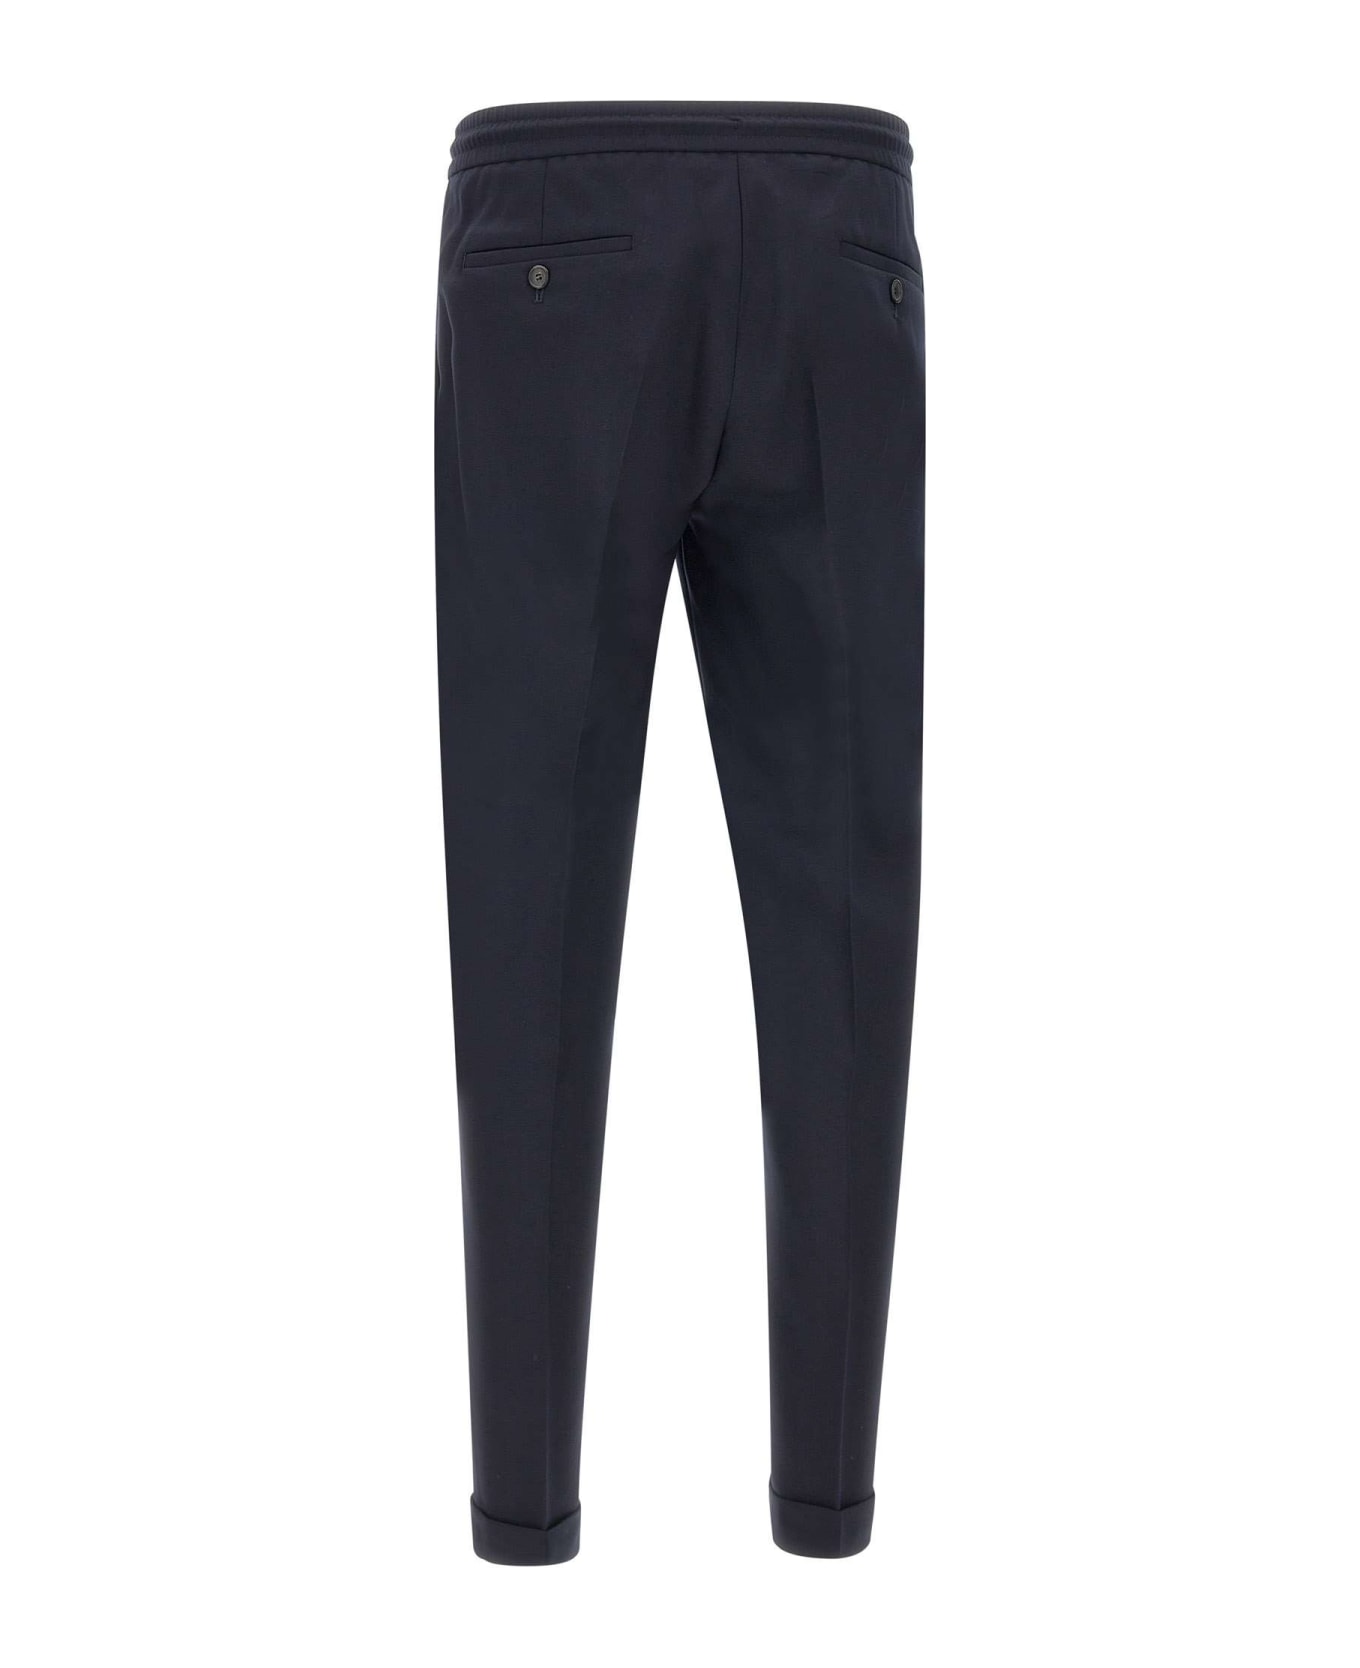 Paul Smith "a Suit To Travel In" Wool Trousers - BLUE